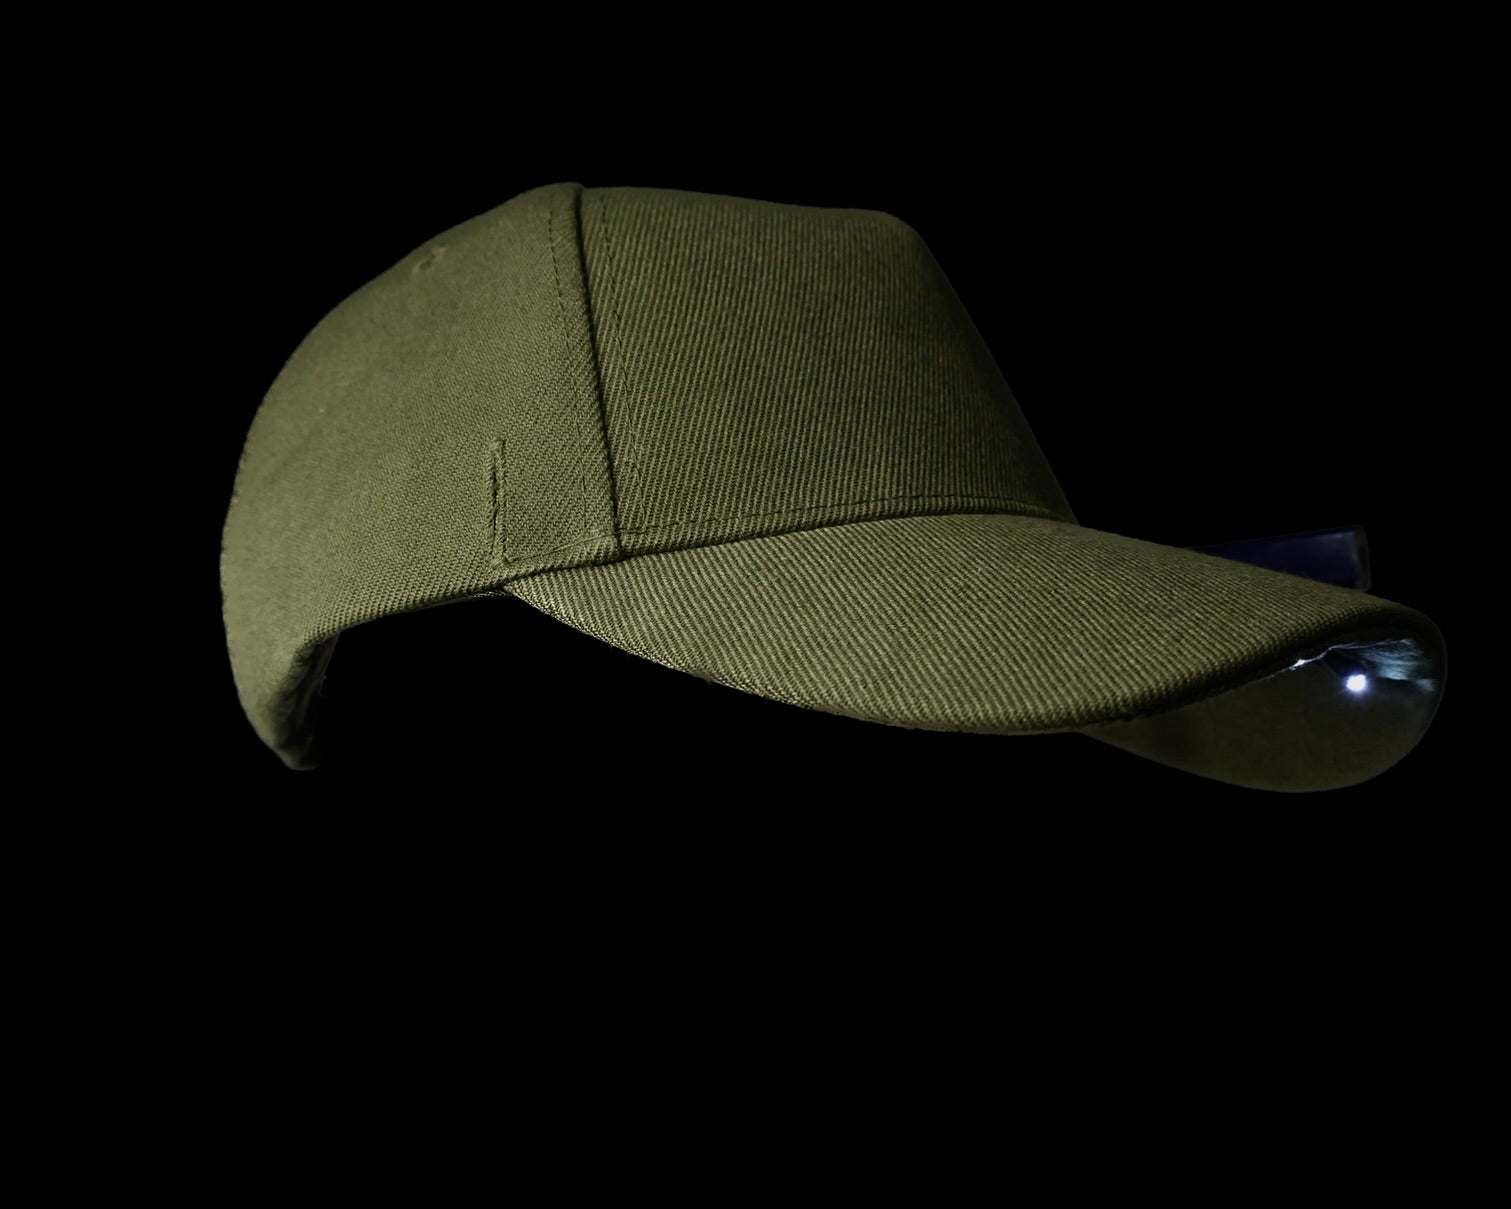 The Contractor Hat 3.0